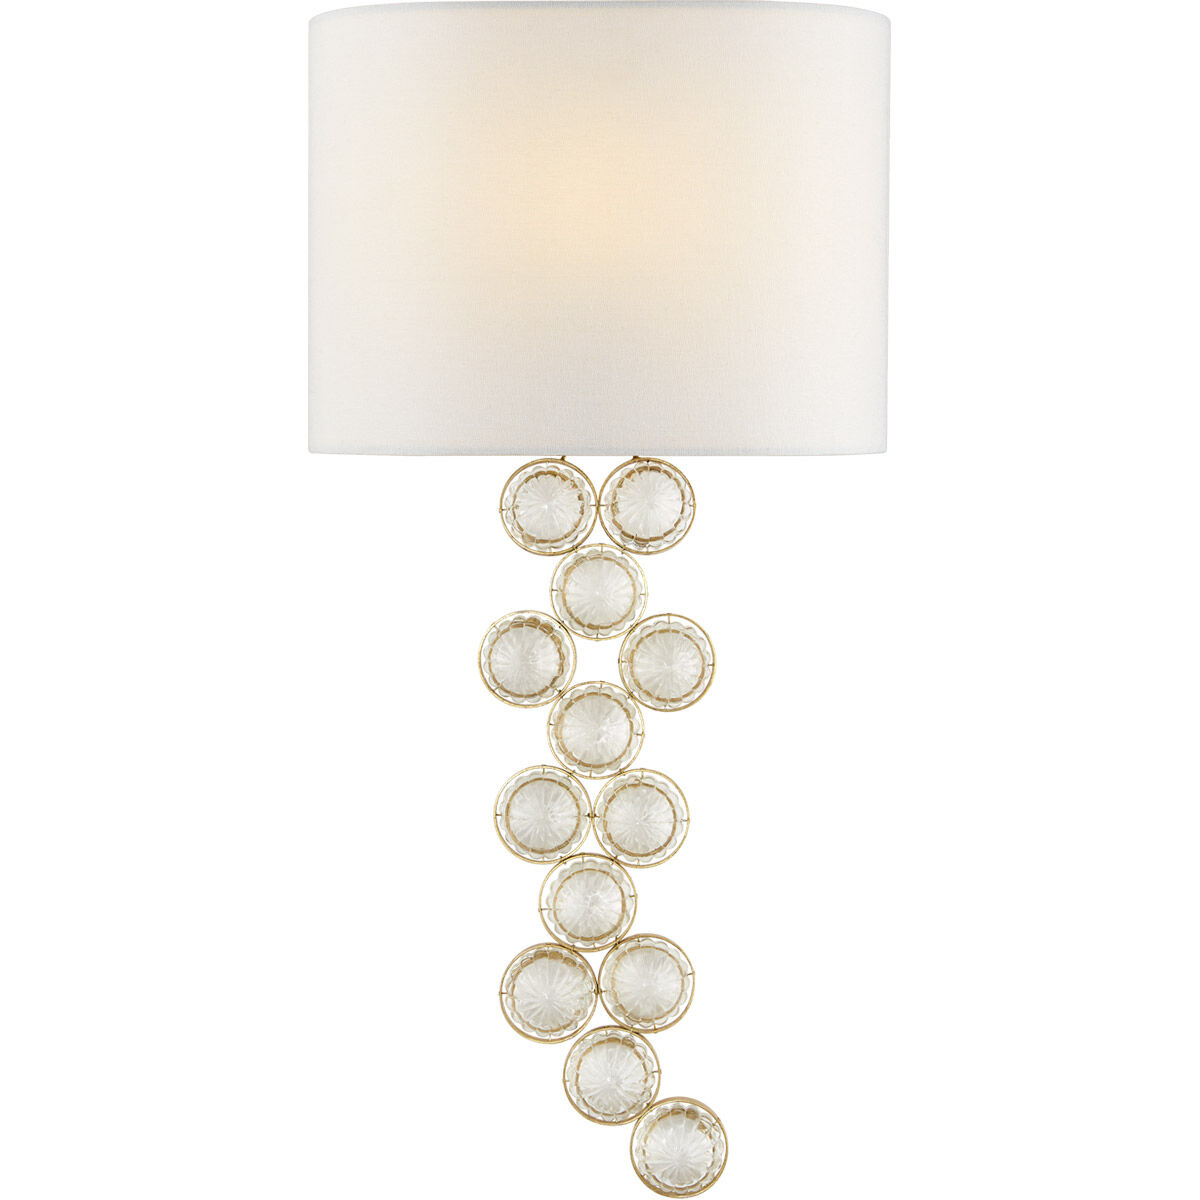 Julie Neill Milazzo Sconce